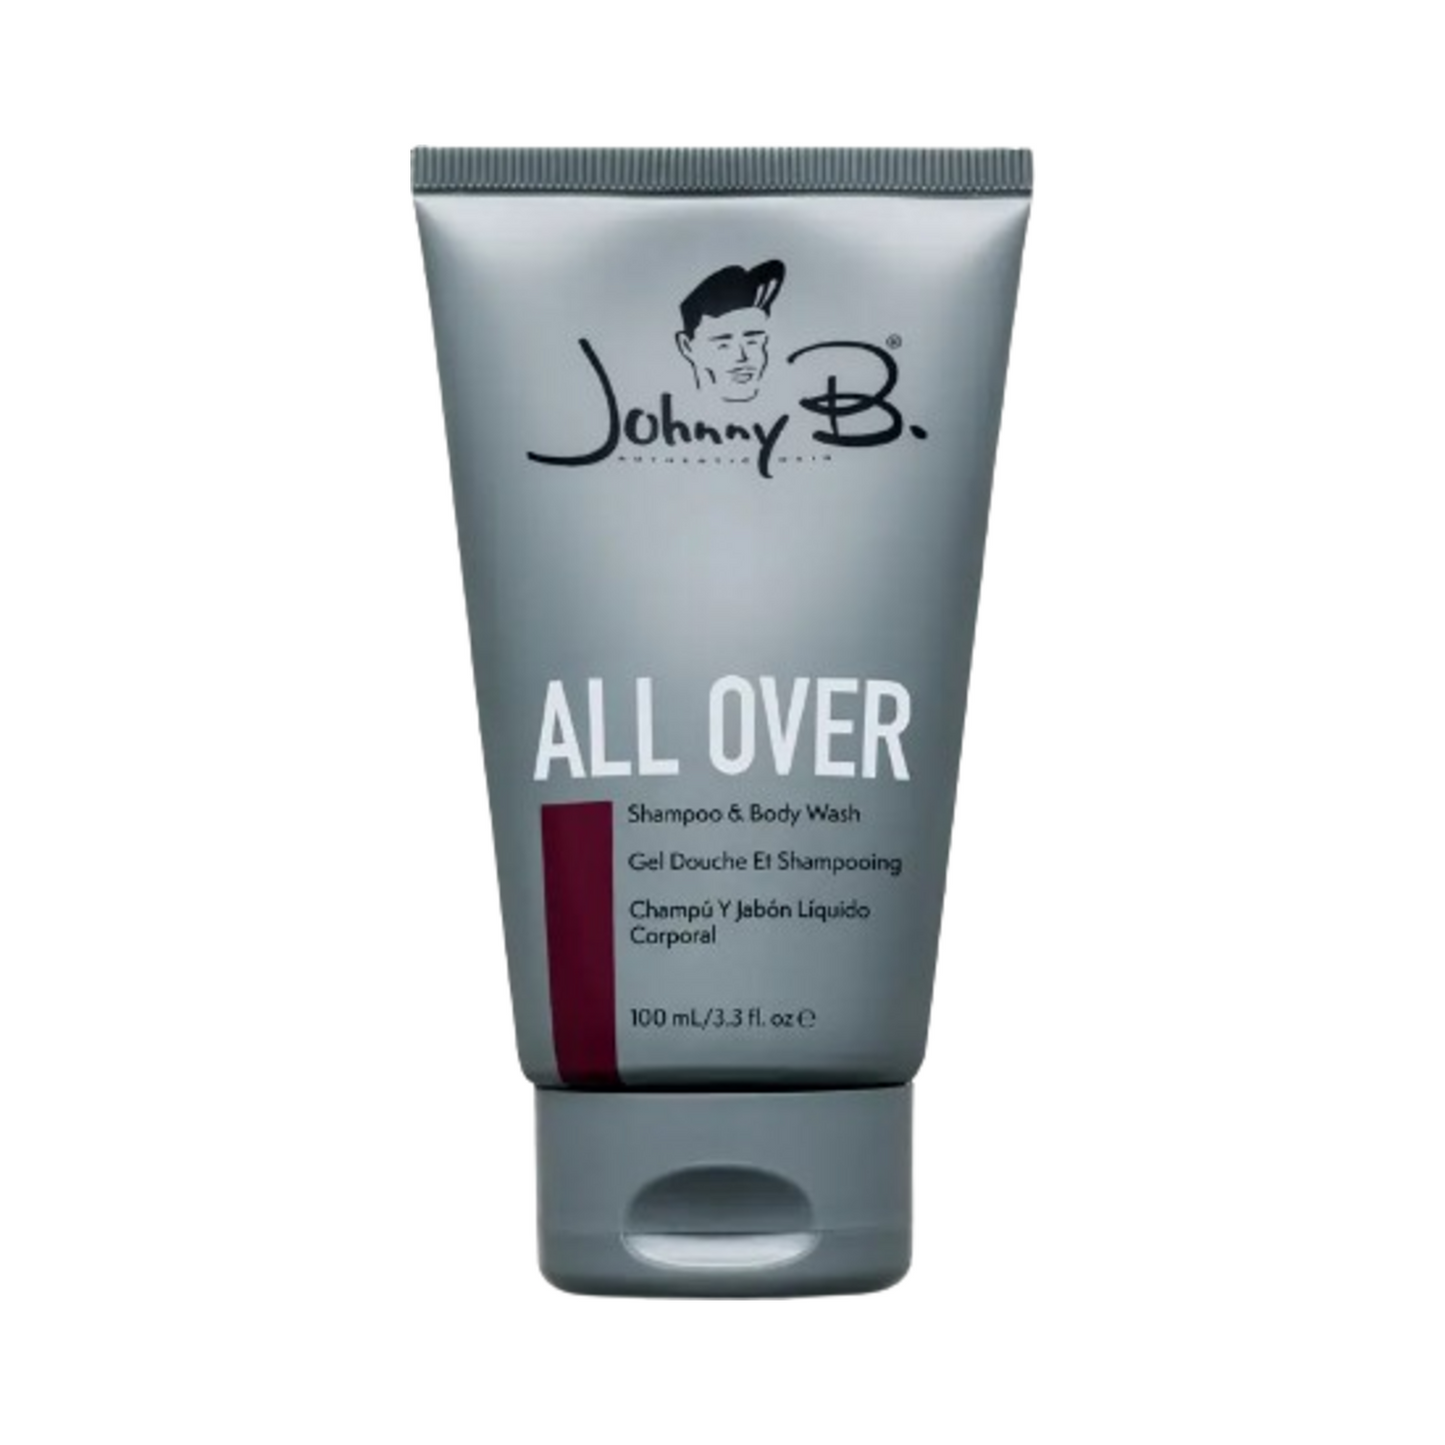 Johnny B. All Over Shampoo and Body